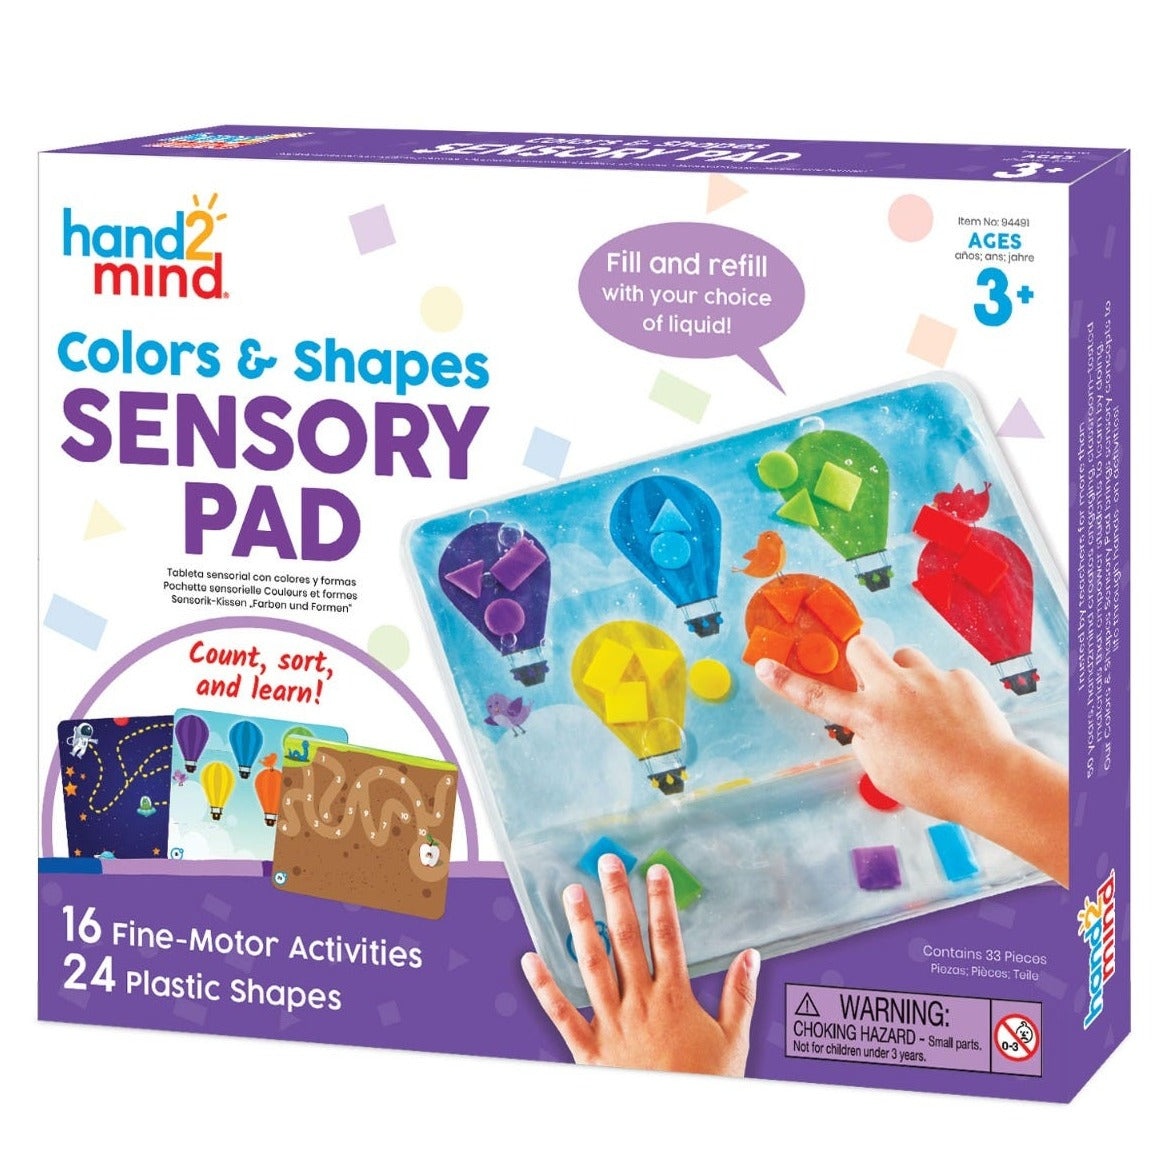 Colours & Shapes Sensory Pad, This sturdy, reusable sensory bag is ideal for tactile play and fine motor skills activities and will keep little hands busy and learning. Fill the bag with water or a clear gel. Then children use their fingers and hands to move the colourful geometric shapes around the bag. The pad comes with 8 colourful Activity Cards that fit neatly into the back of the bag, and feature fun learning activities. Children can play with this sensory bag on their laps, or use it at a table. This